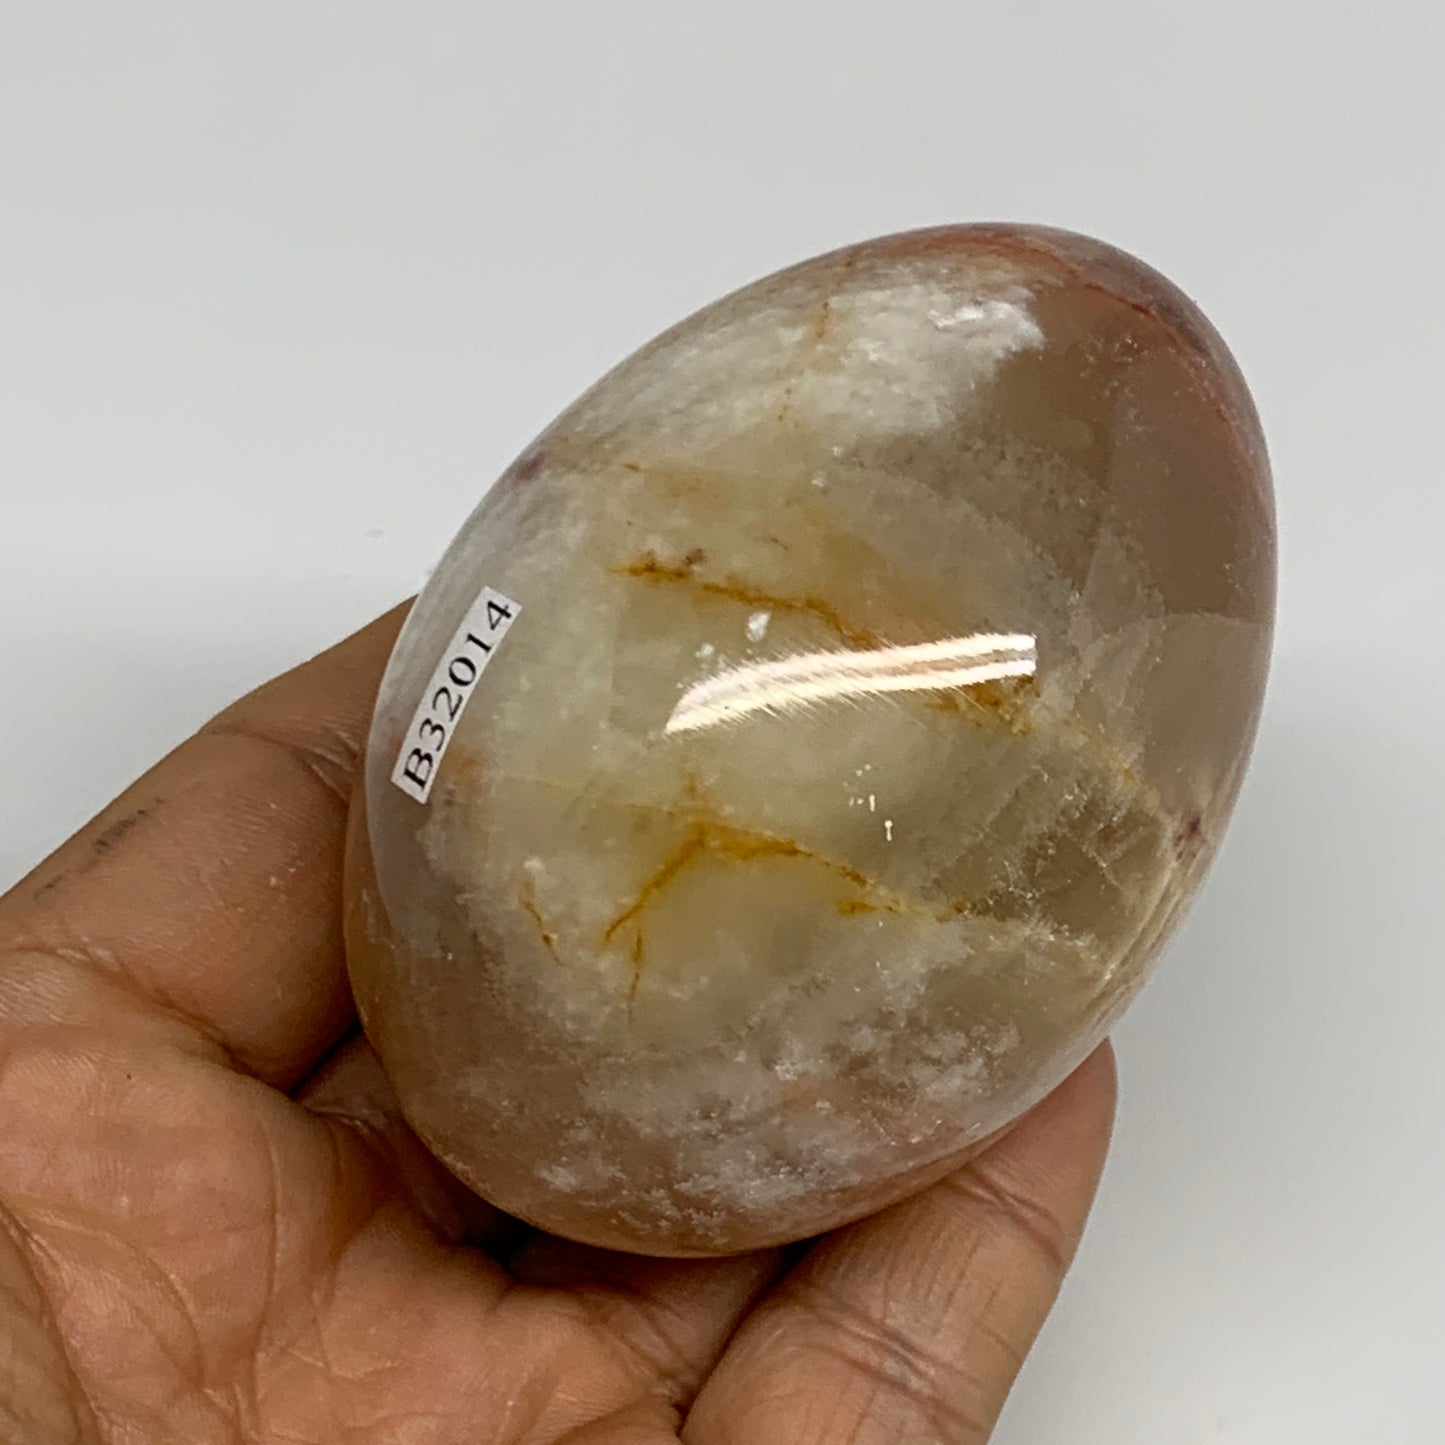 256g, 2.8"x2" Natural Green Onyx Egg Gemstone Mineral, from Pakistan, B32014